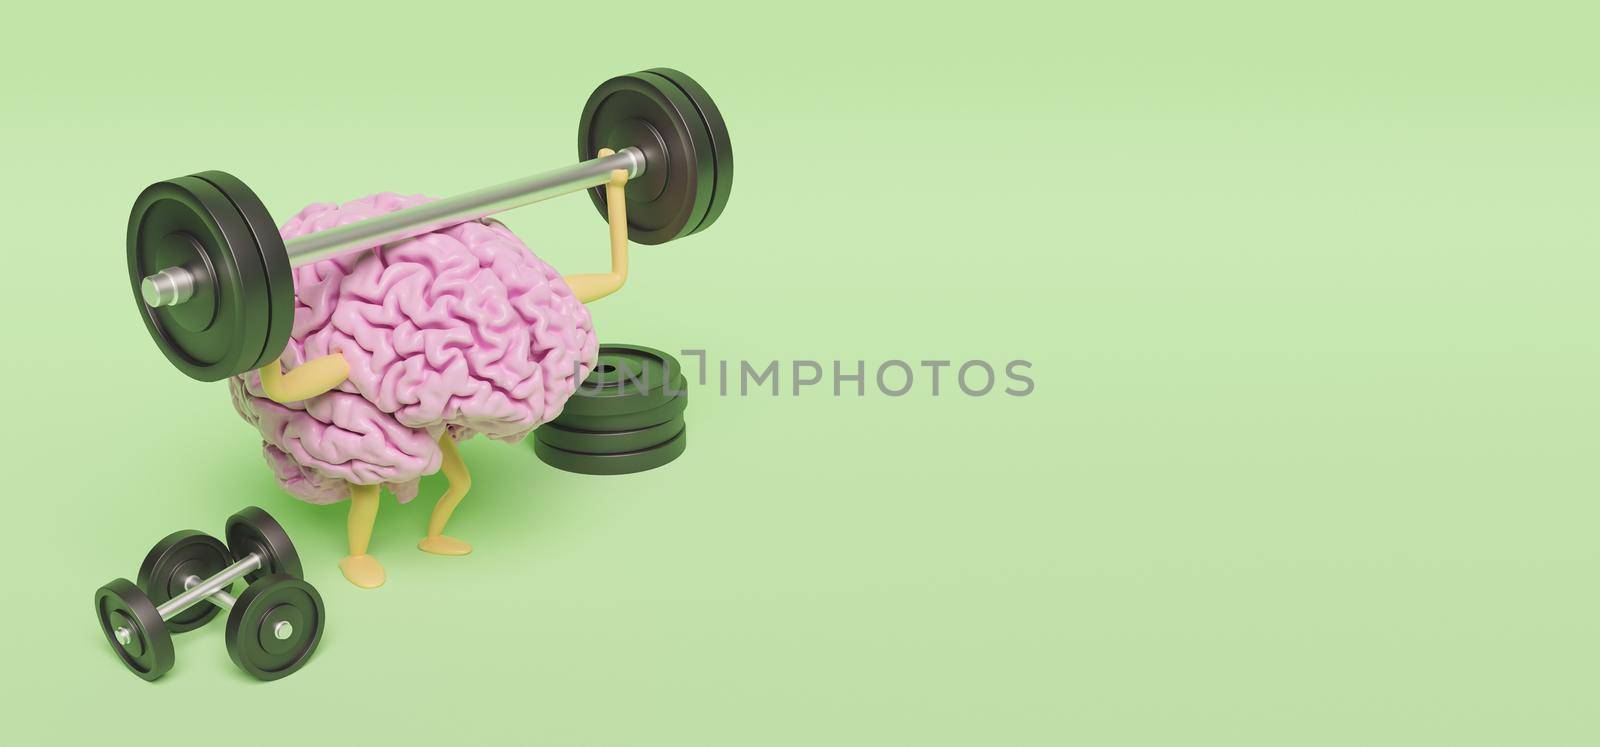 3d illustration of brain exercising with dumbbells by asolano